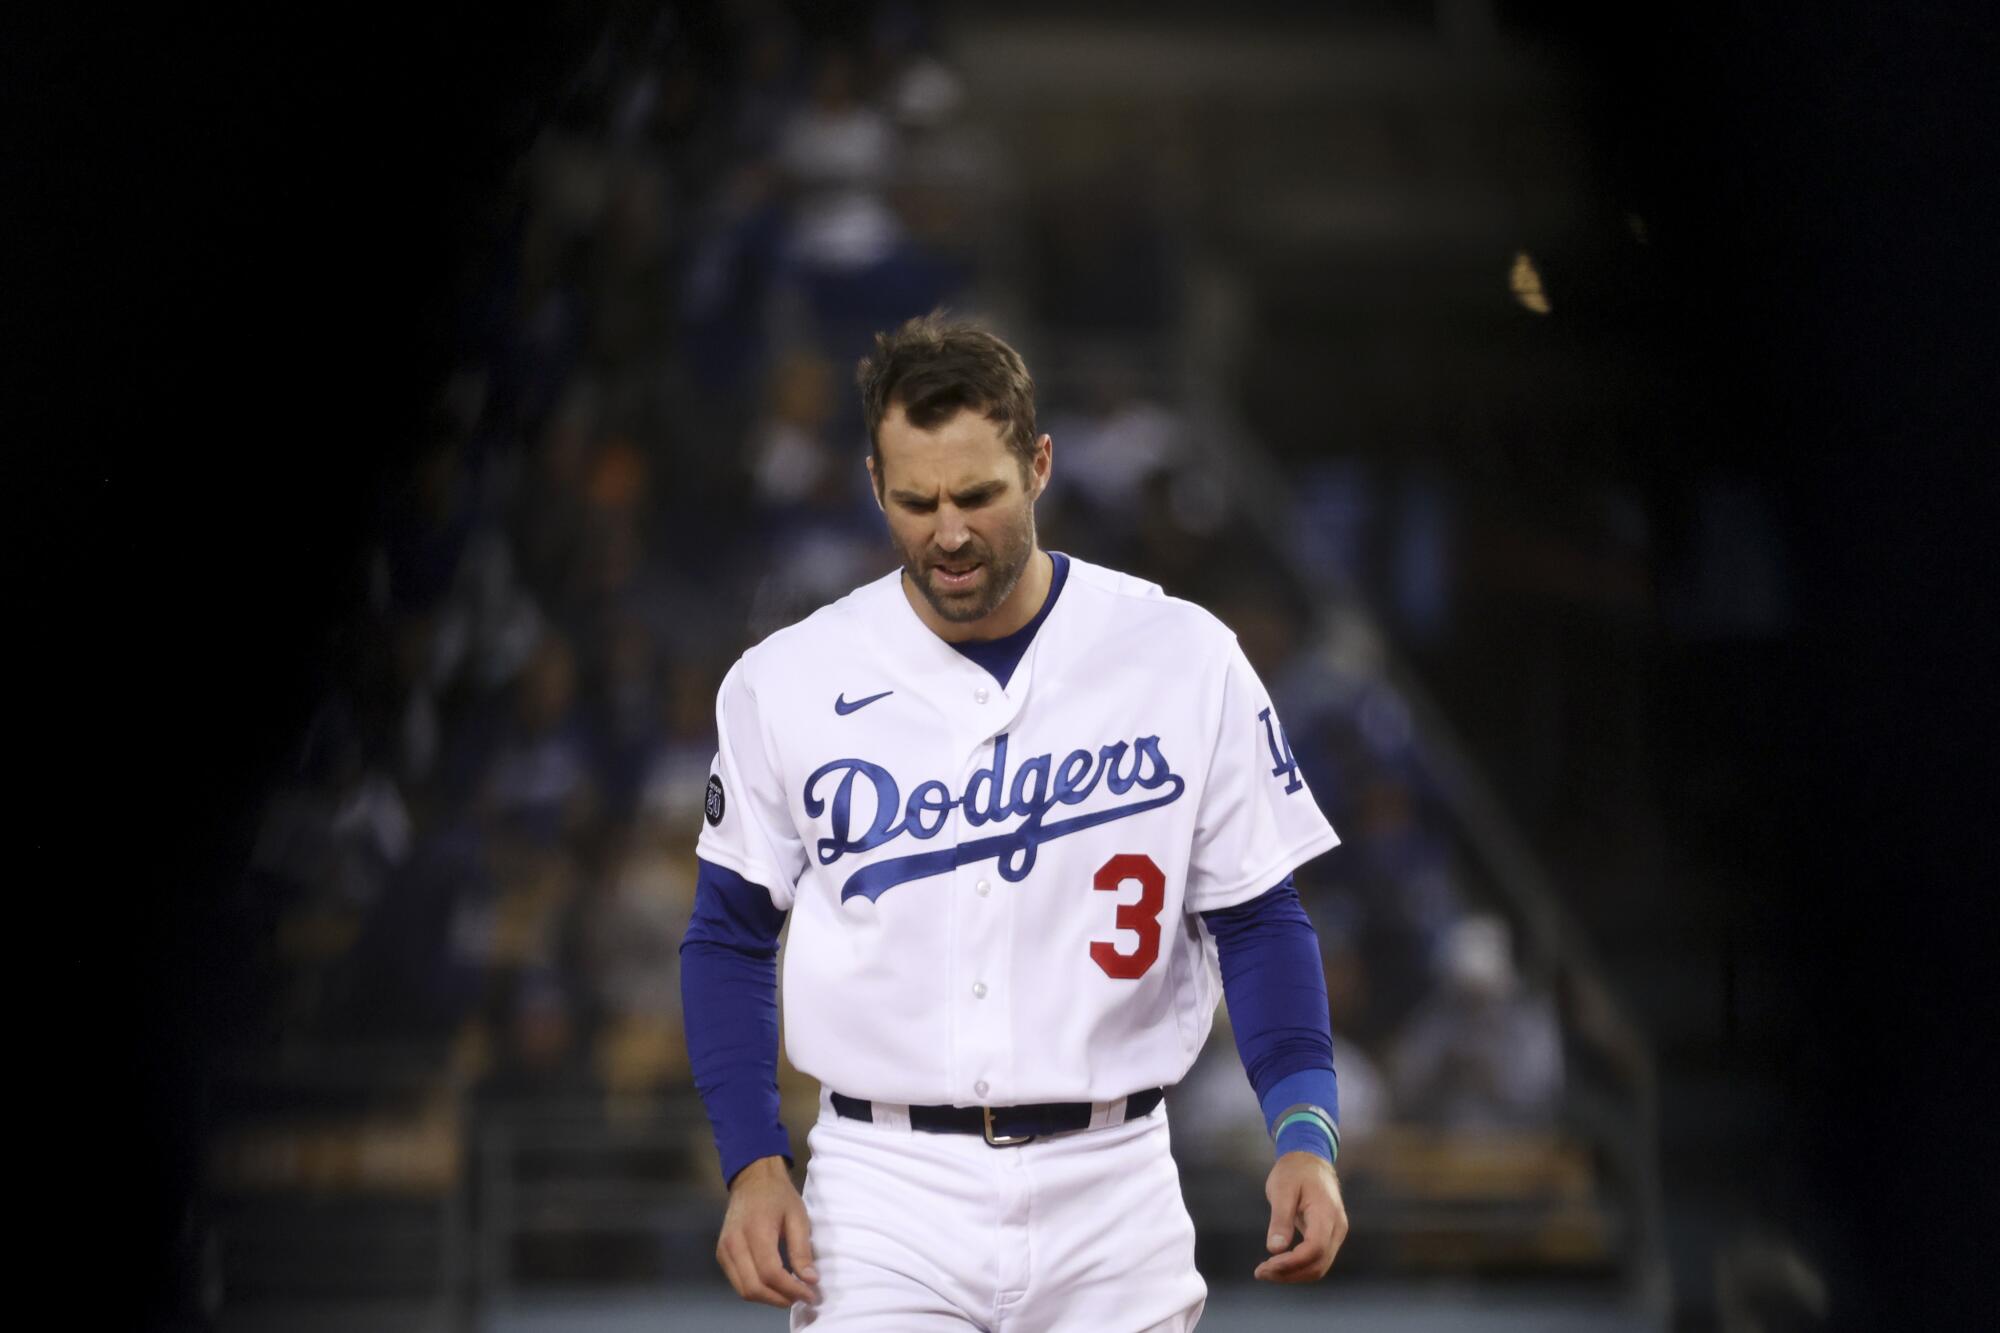 Los Angeles Dodgers' Chris Taylor reacts after a hitting a fly ball for an out